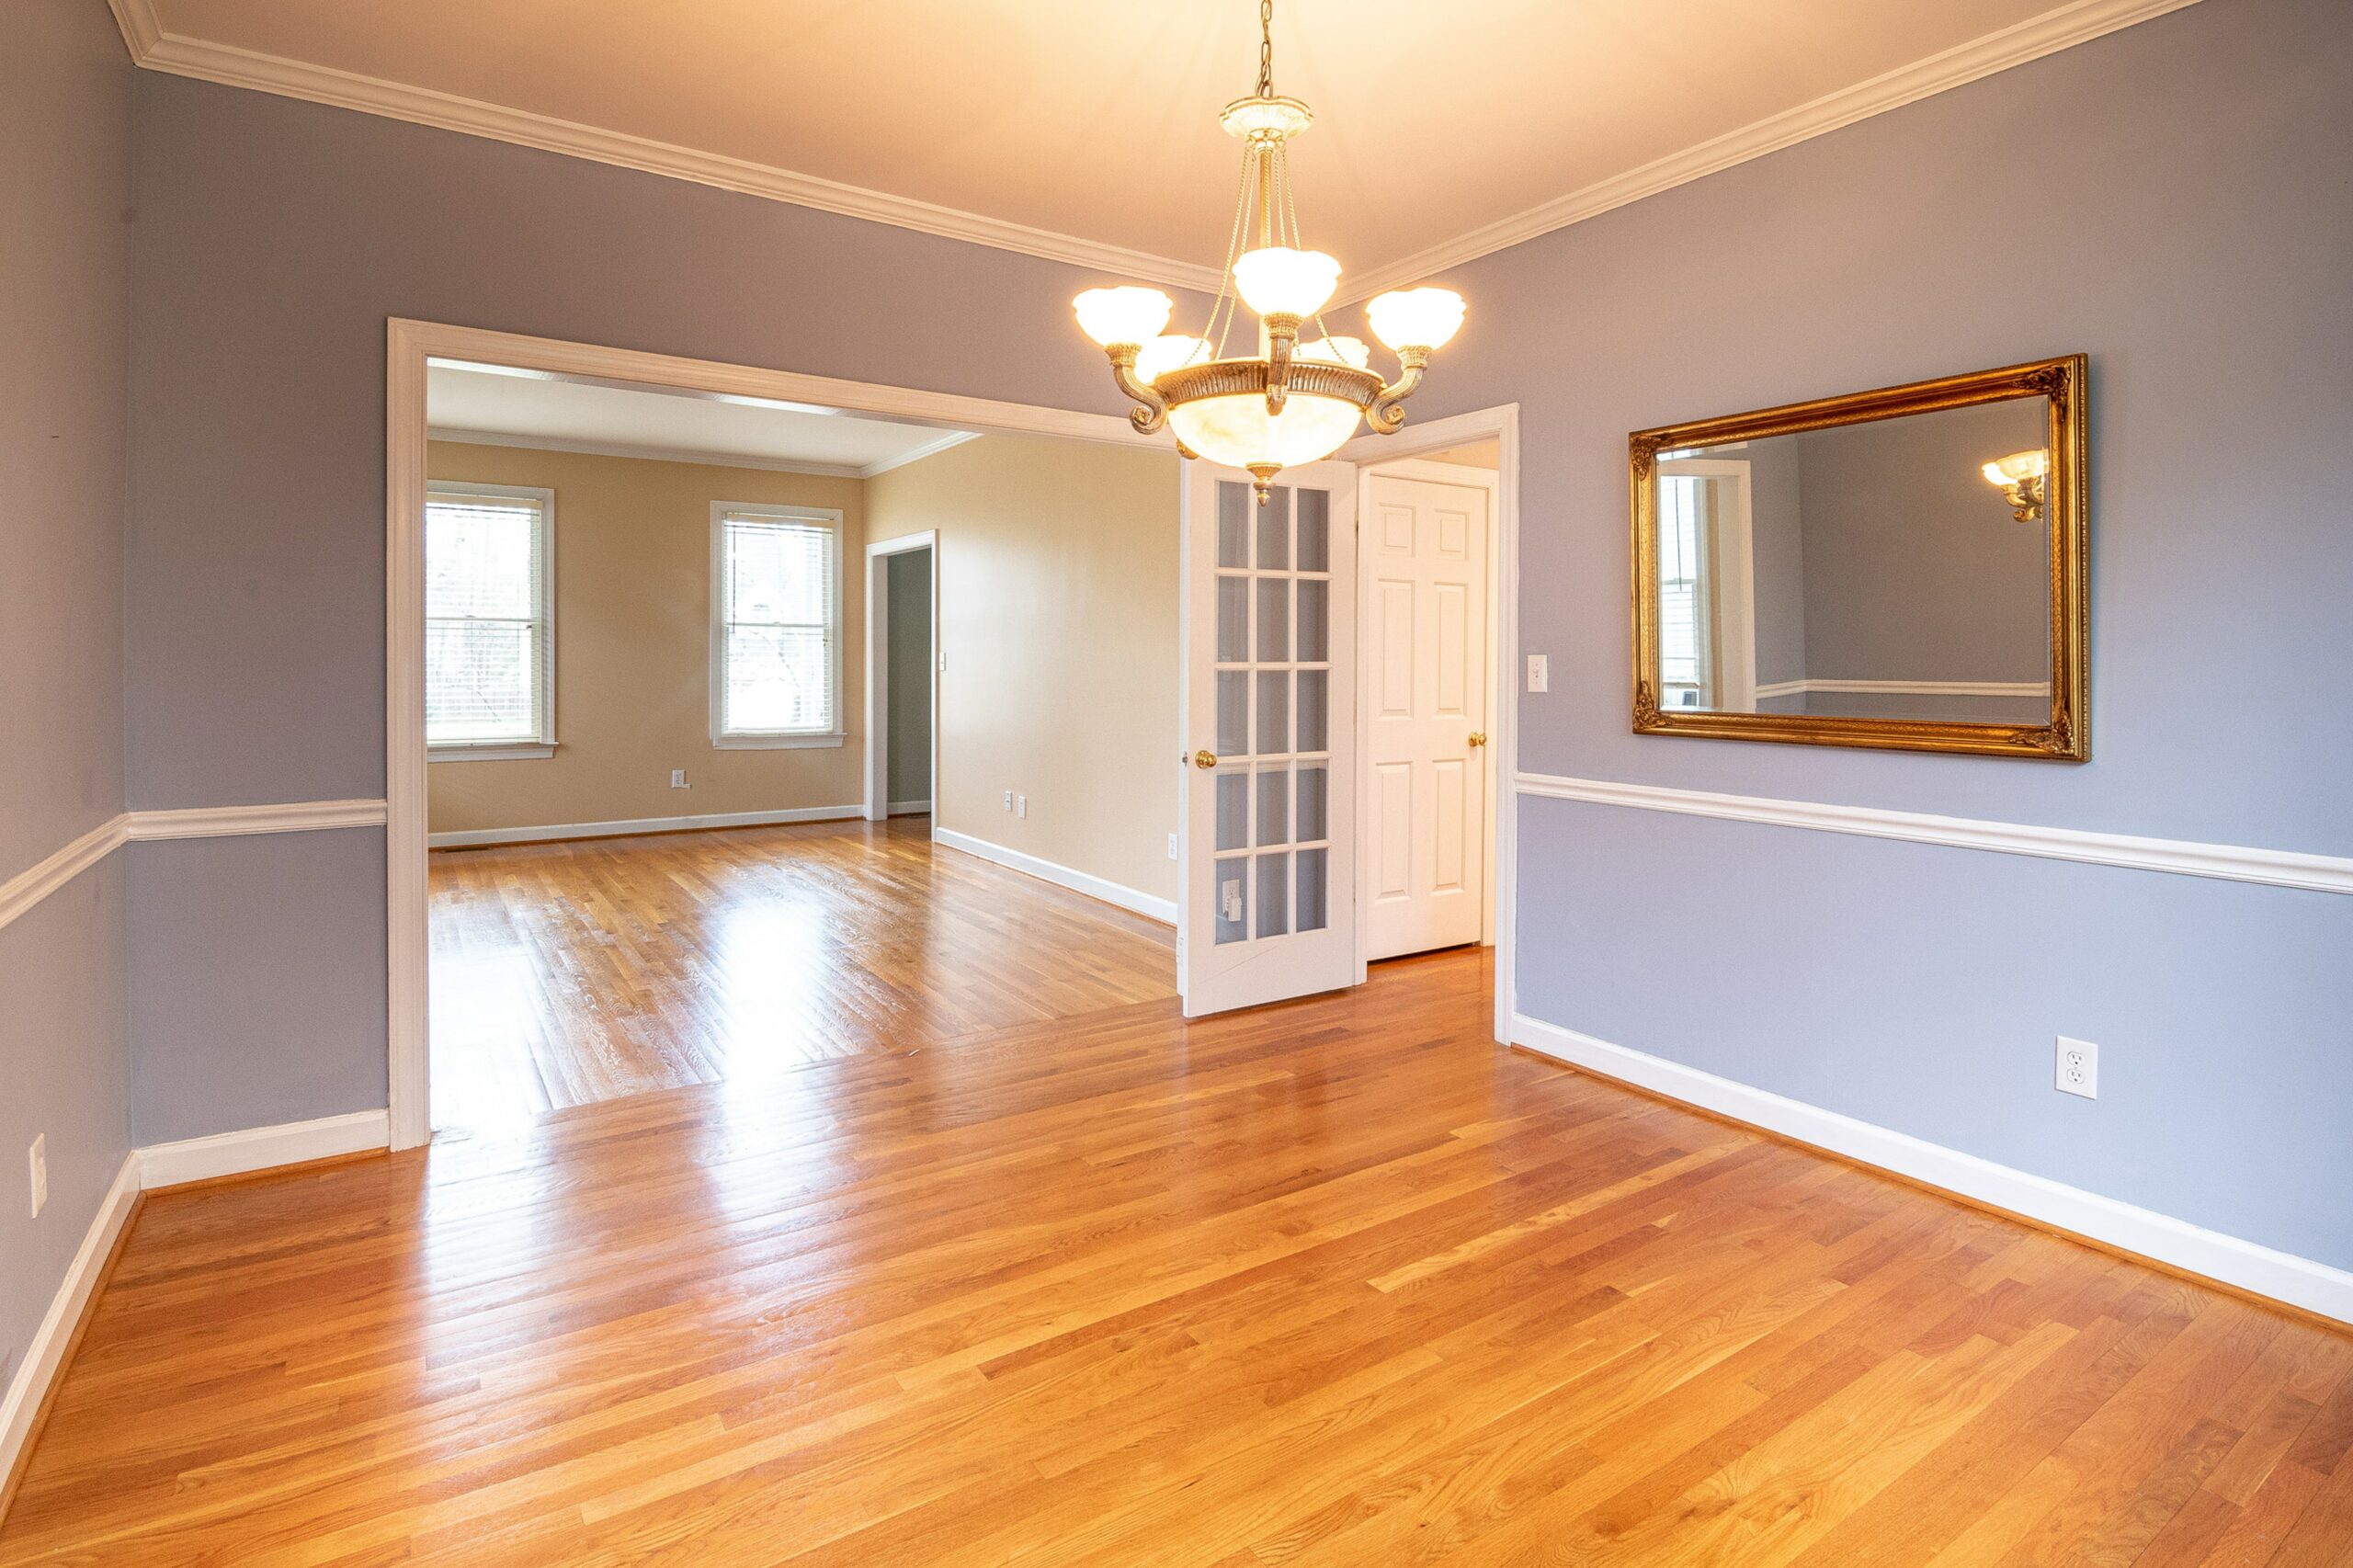 Pros and cons of hardwood flooring